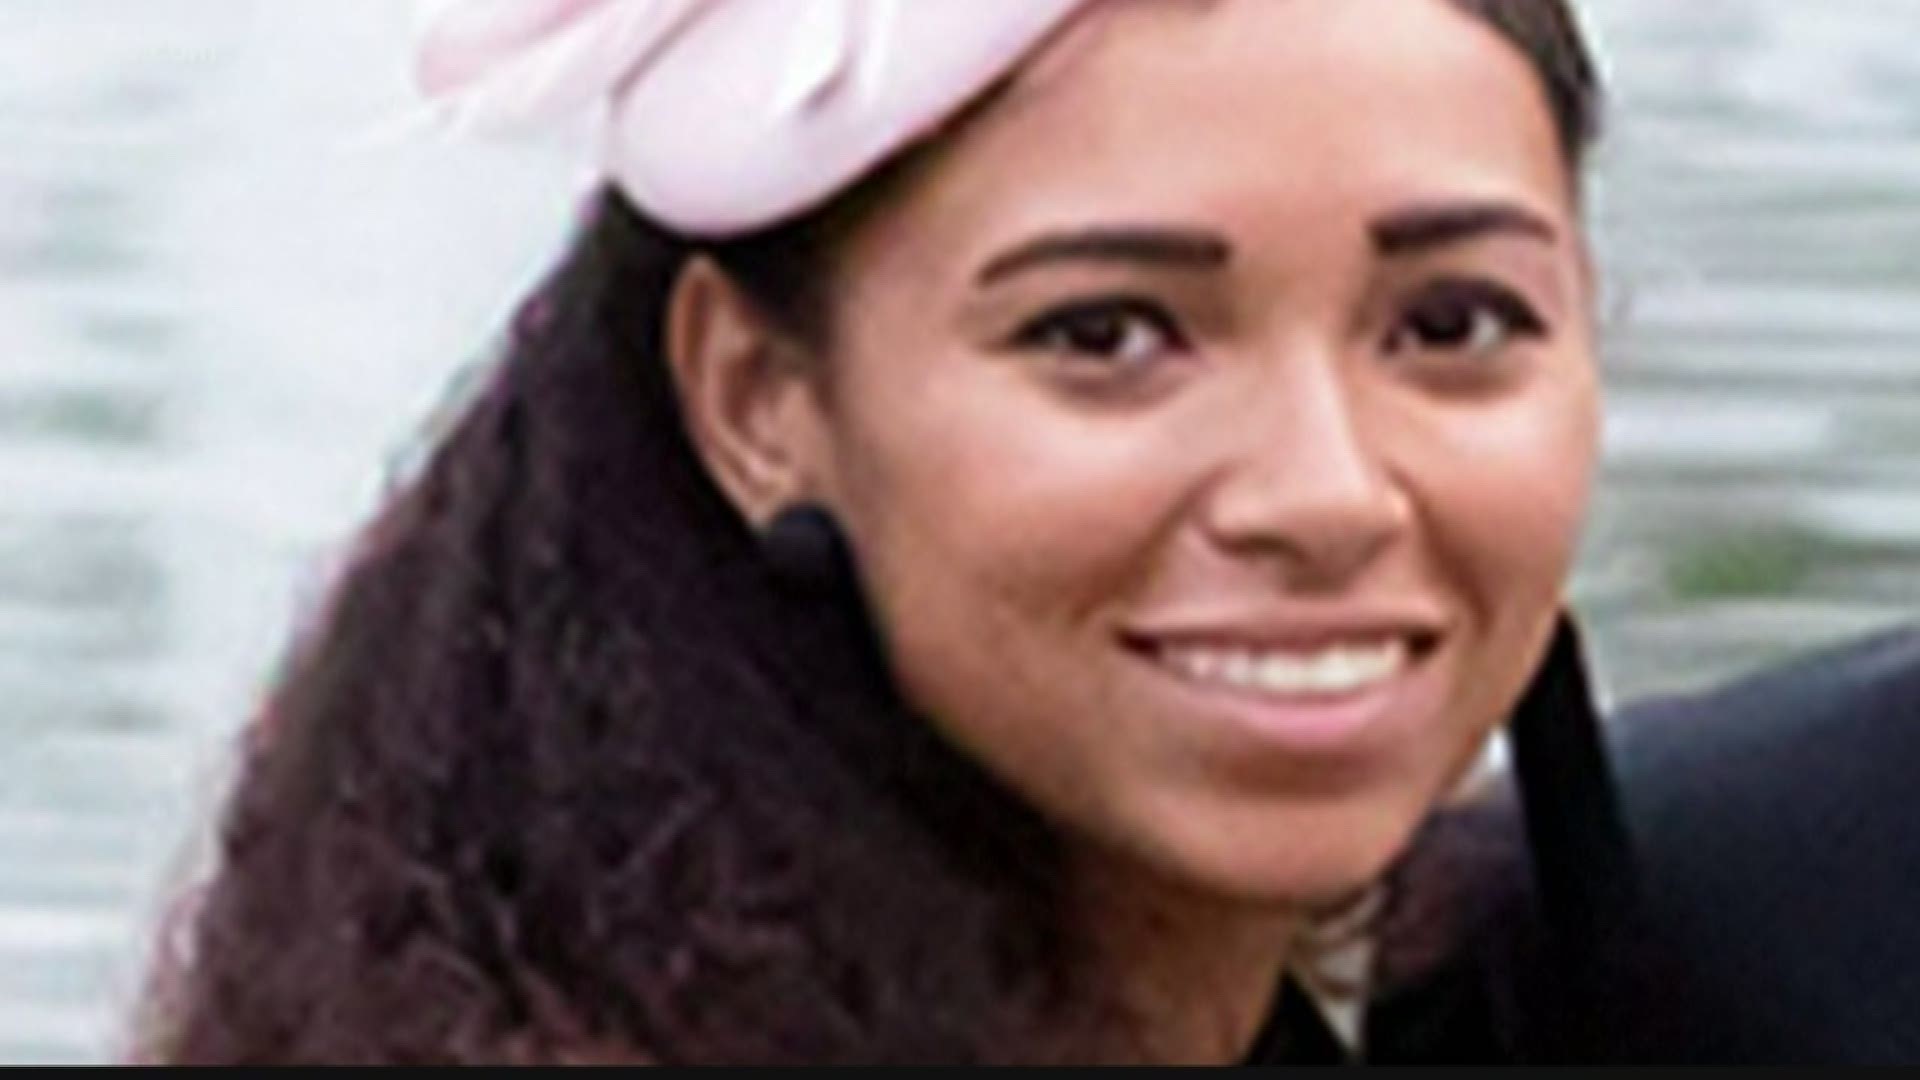 Aniah Blanchard, the 19-year-old stepdaughter of a UFC heavyweight fighter, was last seen more than a month ago.